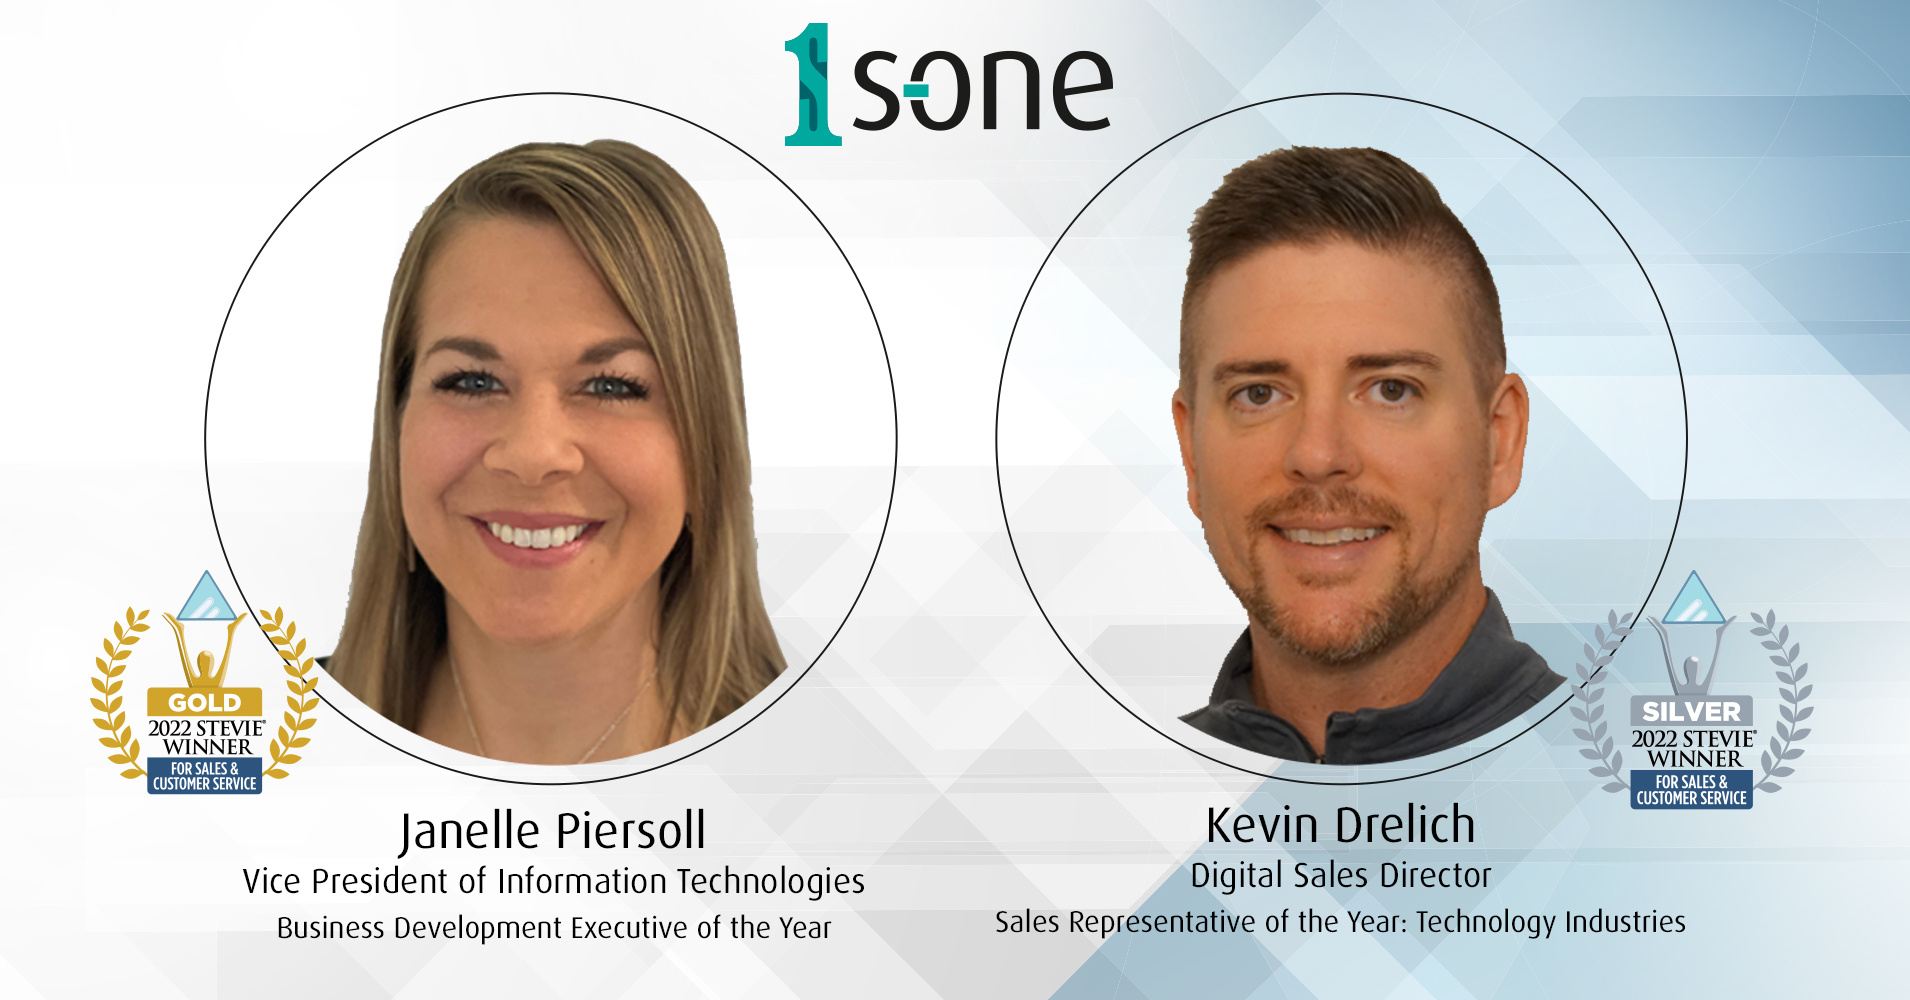 S-One’s Janelle Piersoll and Kevin Drelich Win Business Awards